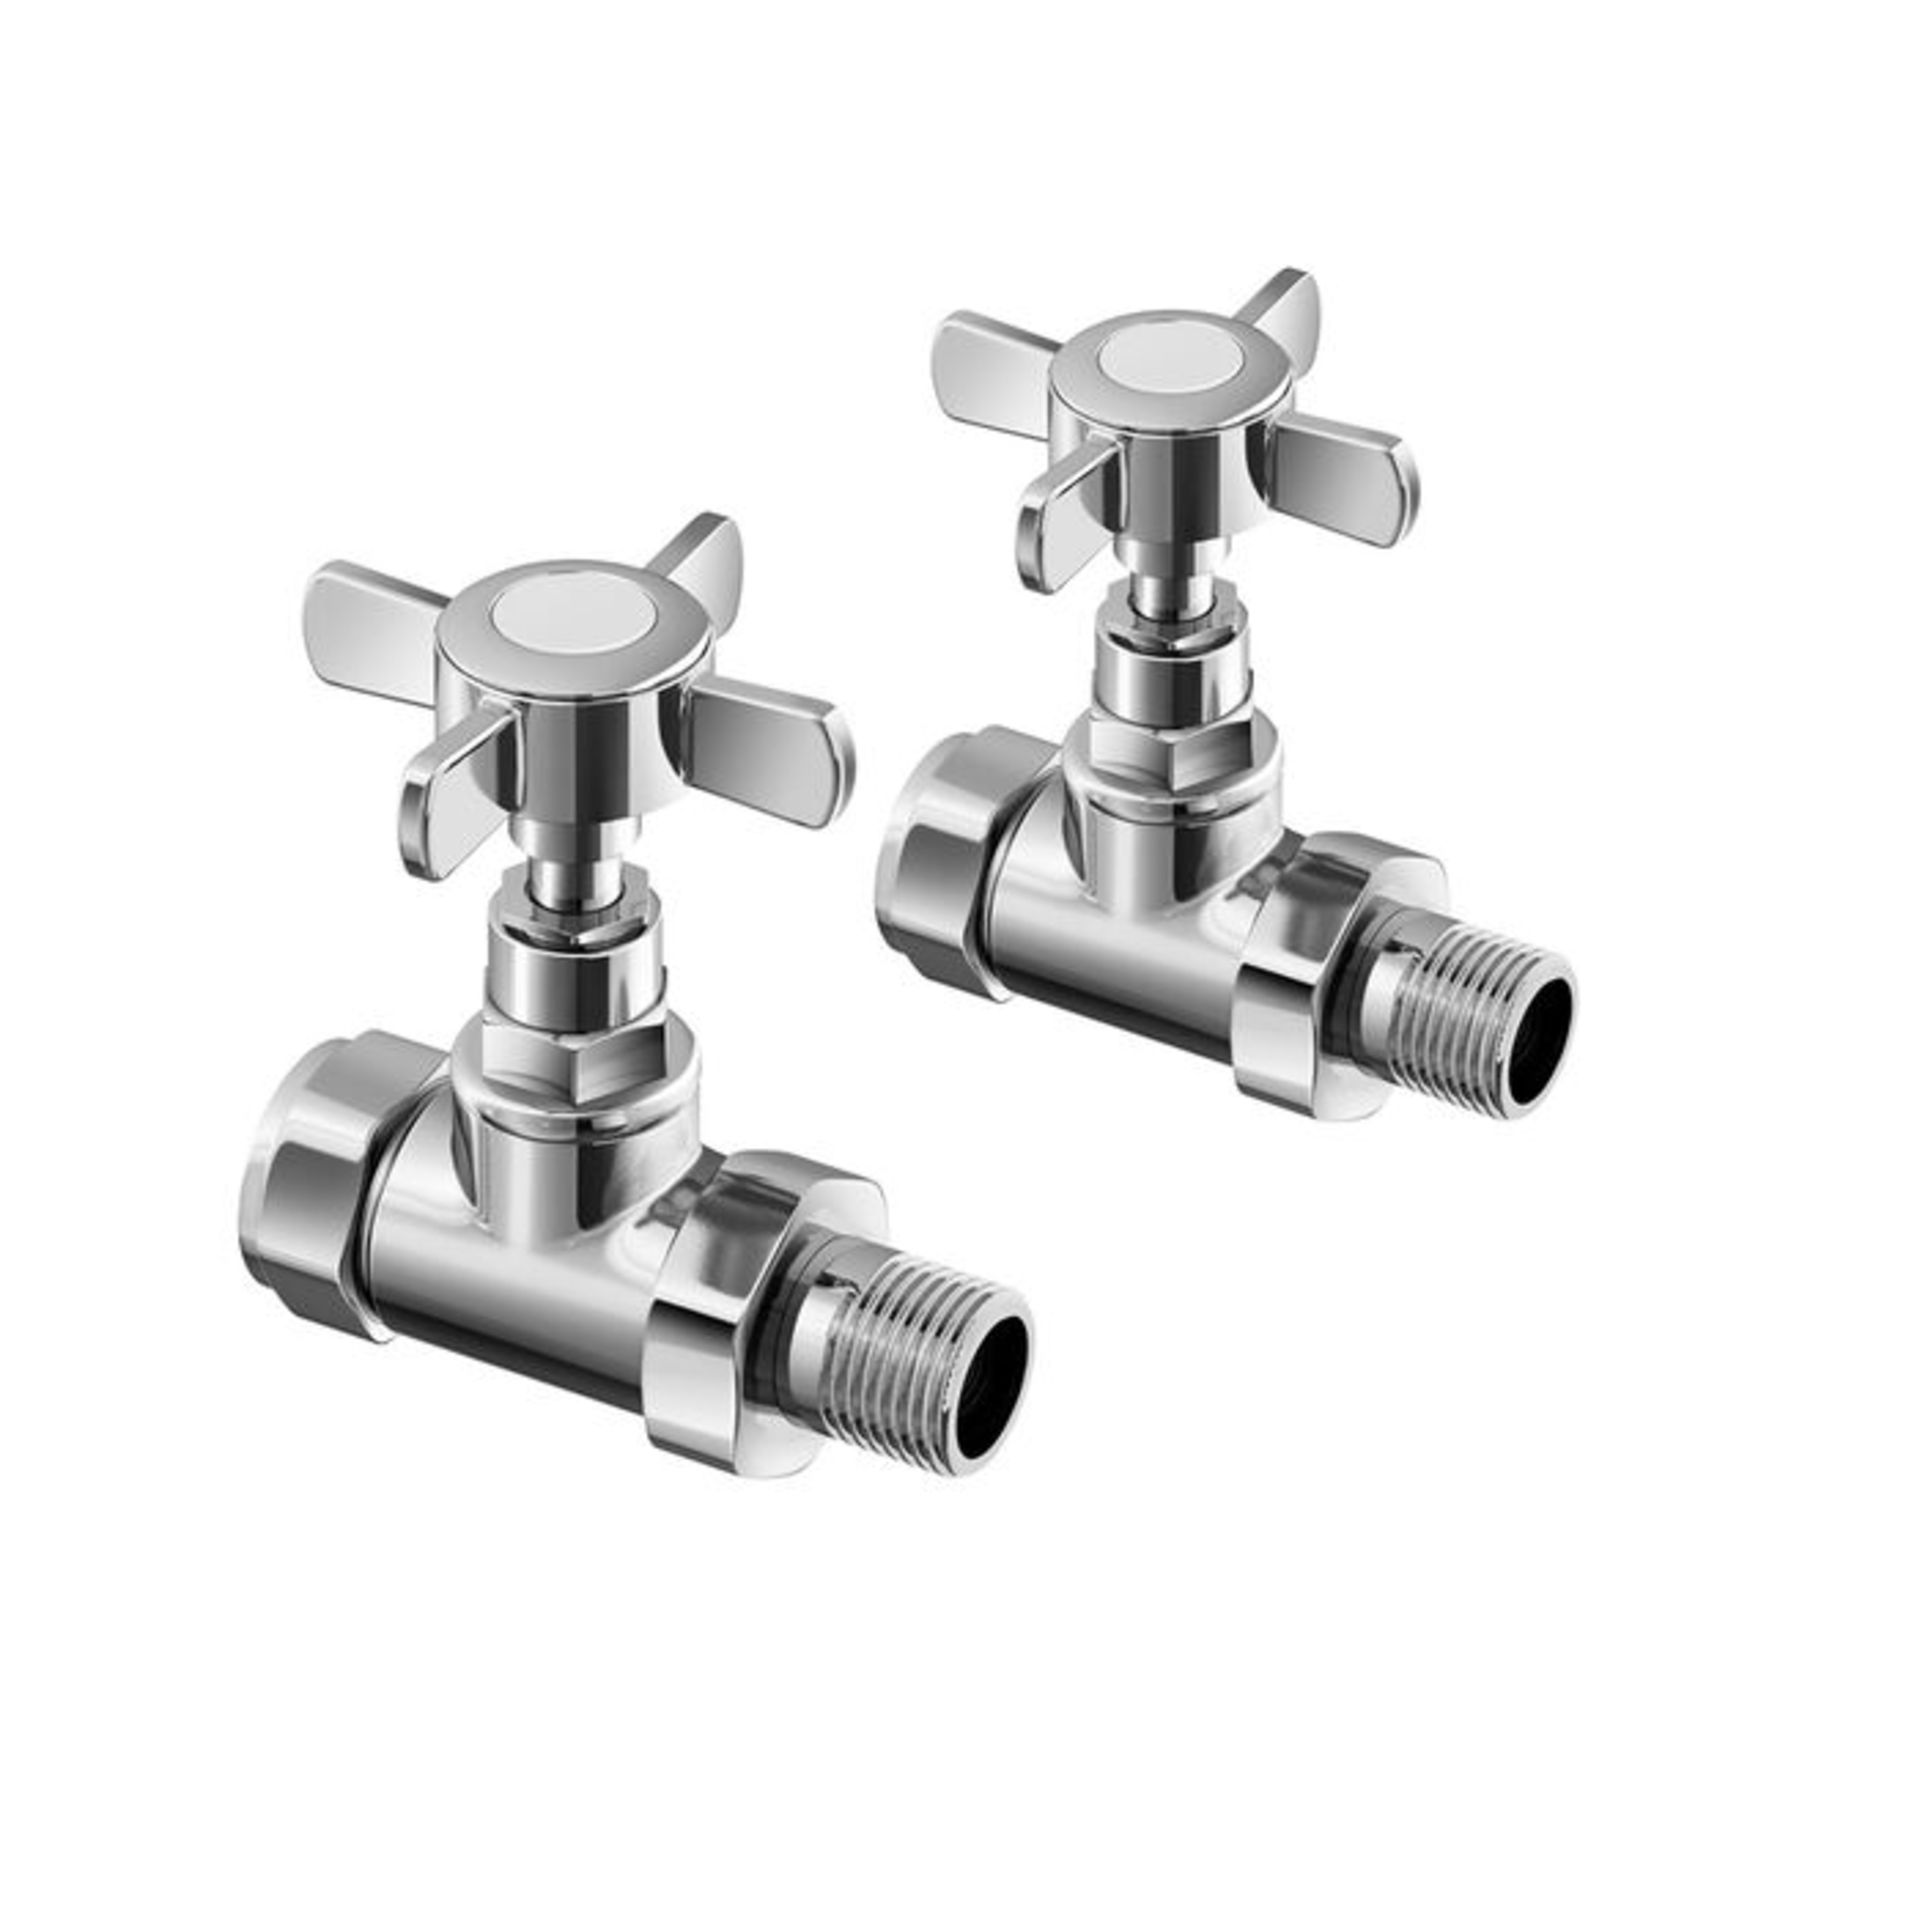 (NV1003) 15mm Standard Connection Straight Polished Chrome Radiator Valves Chrome Plated Solid... - Image 3 of 3